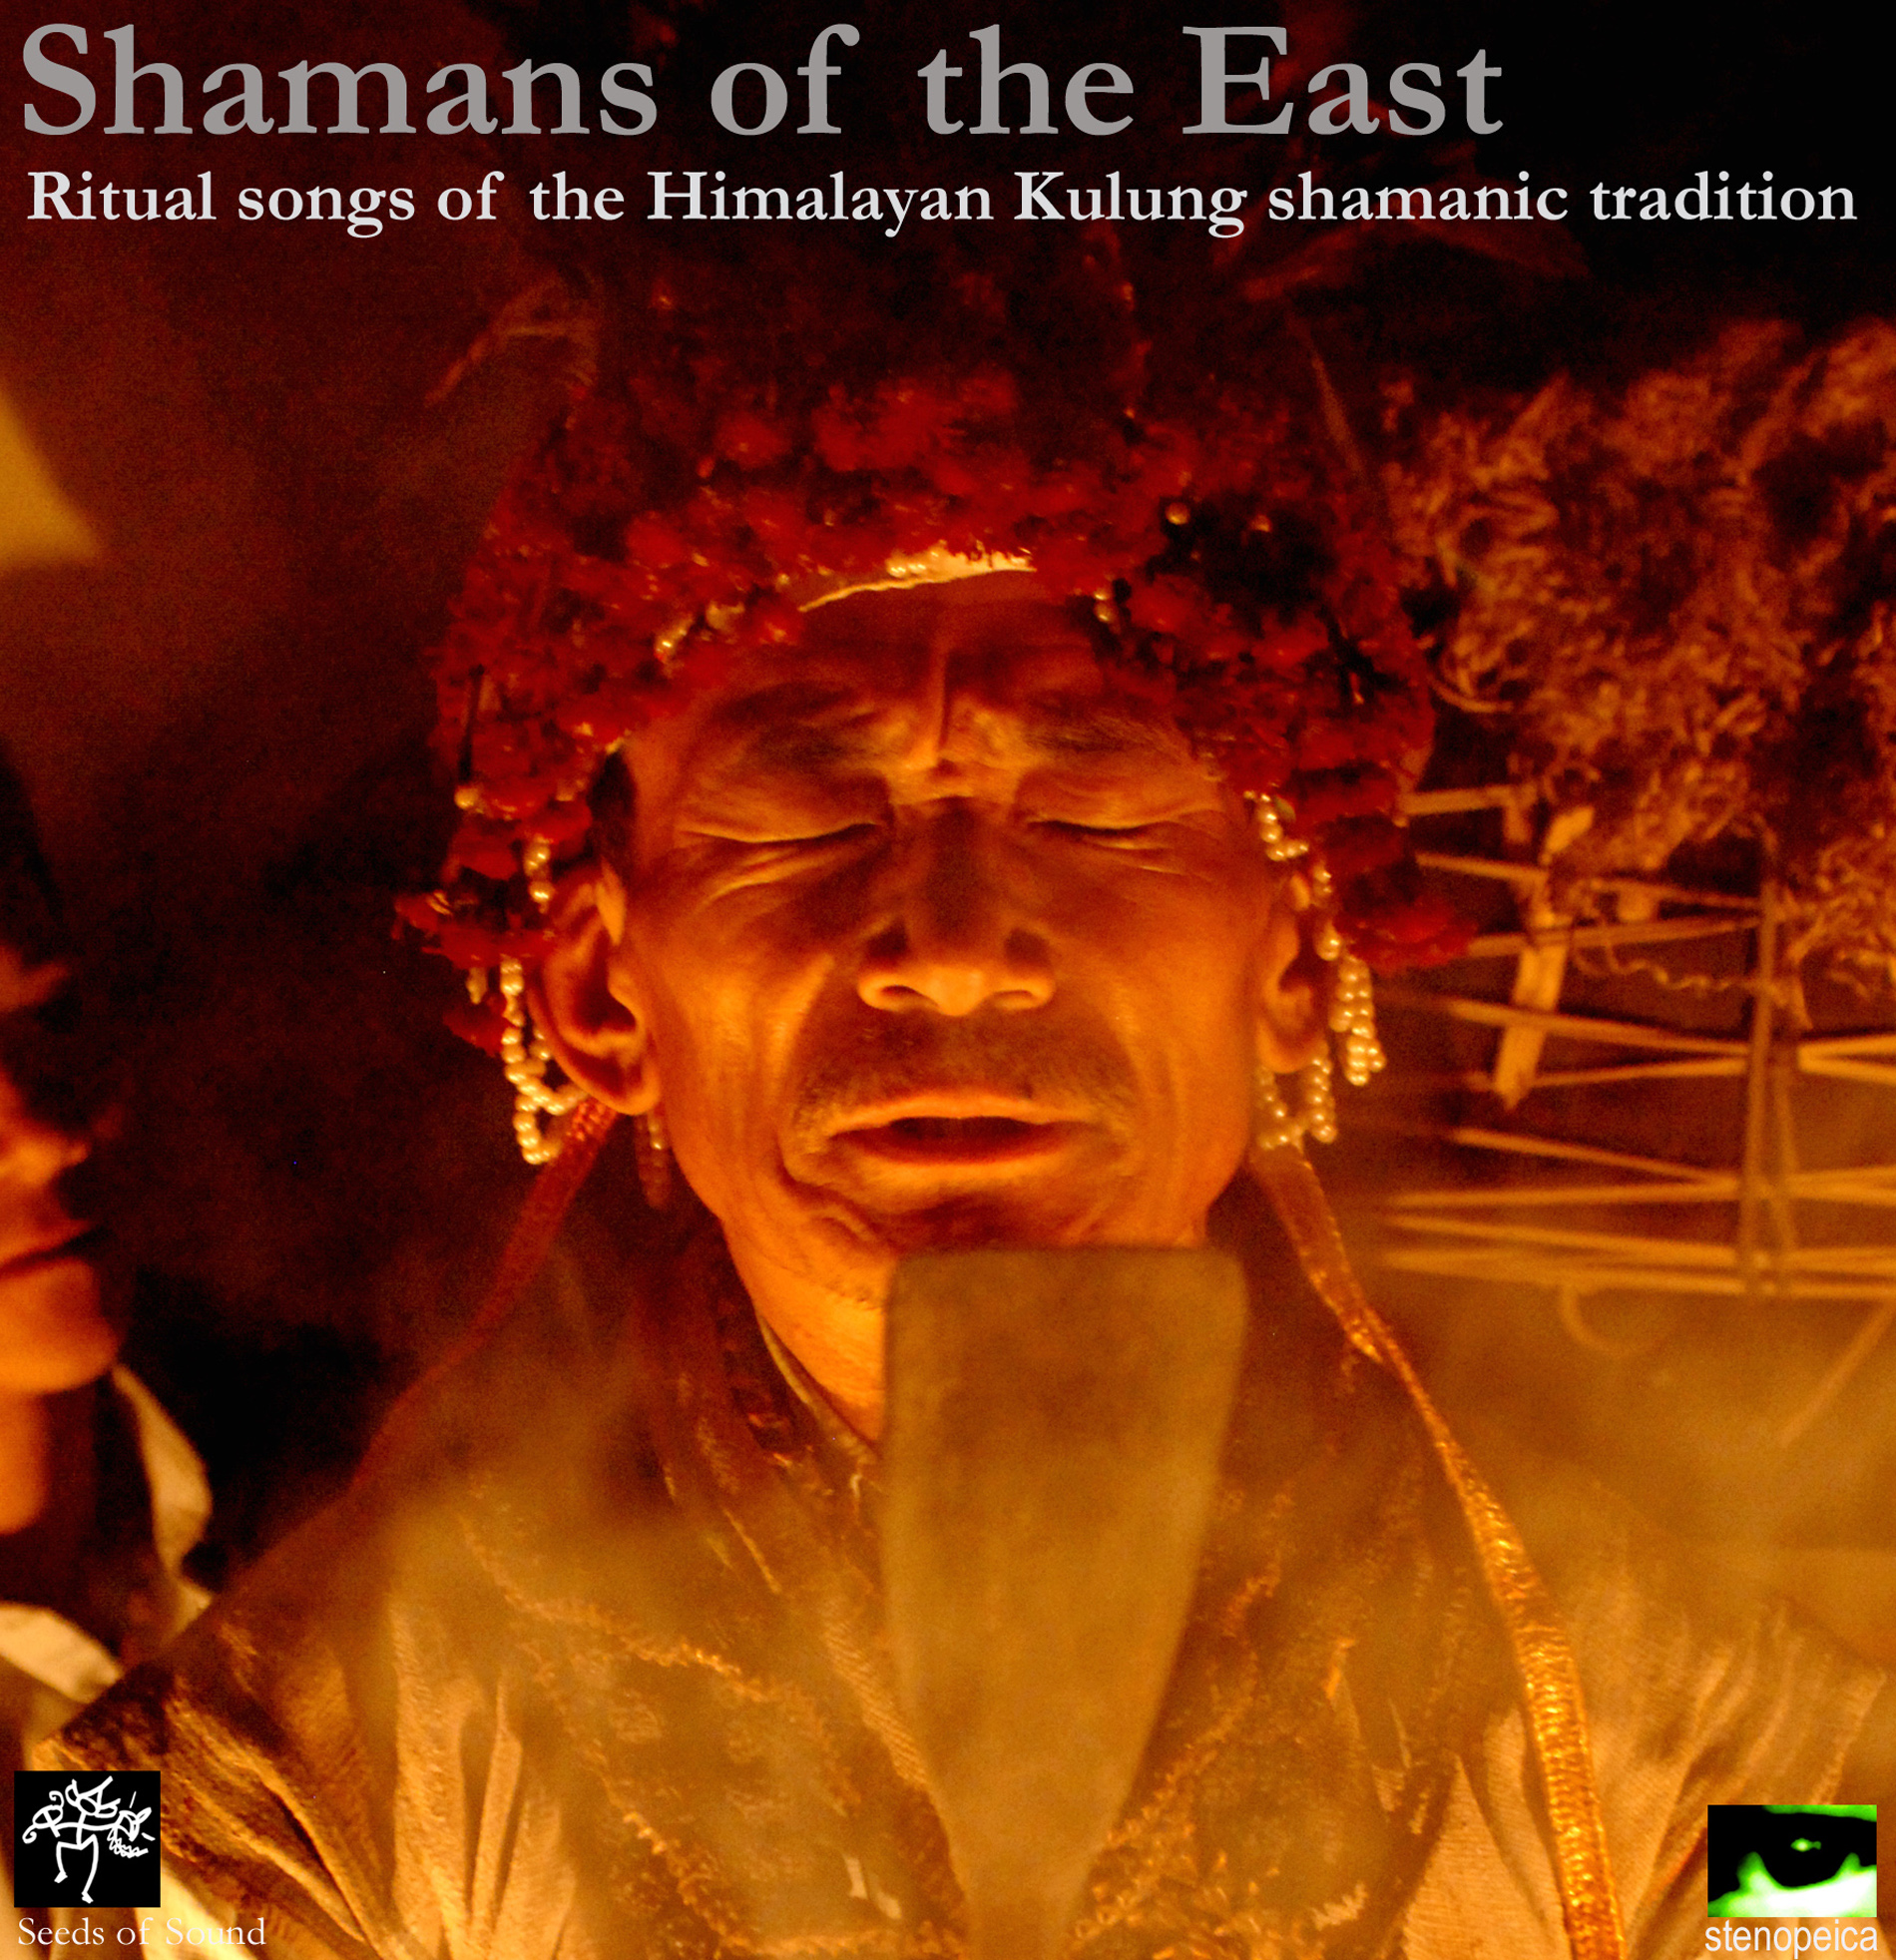 SHAMANS OF THE EAST